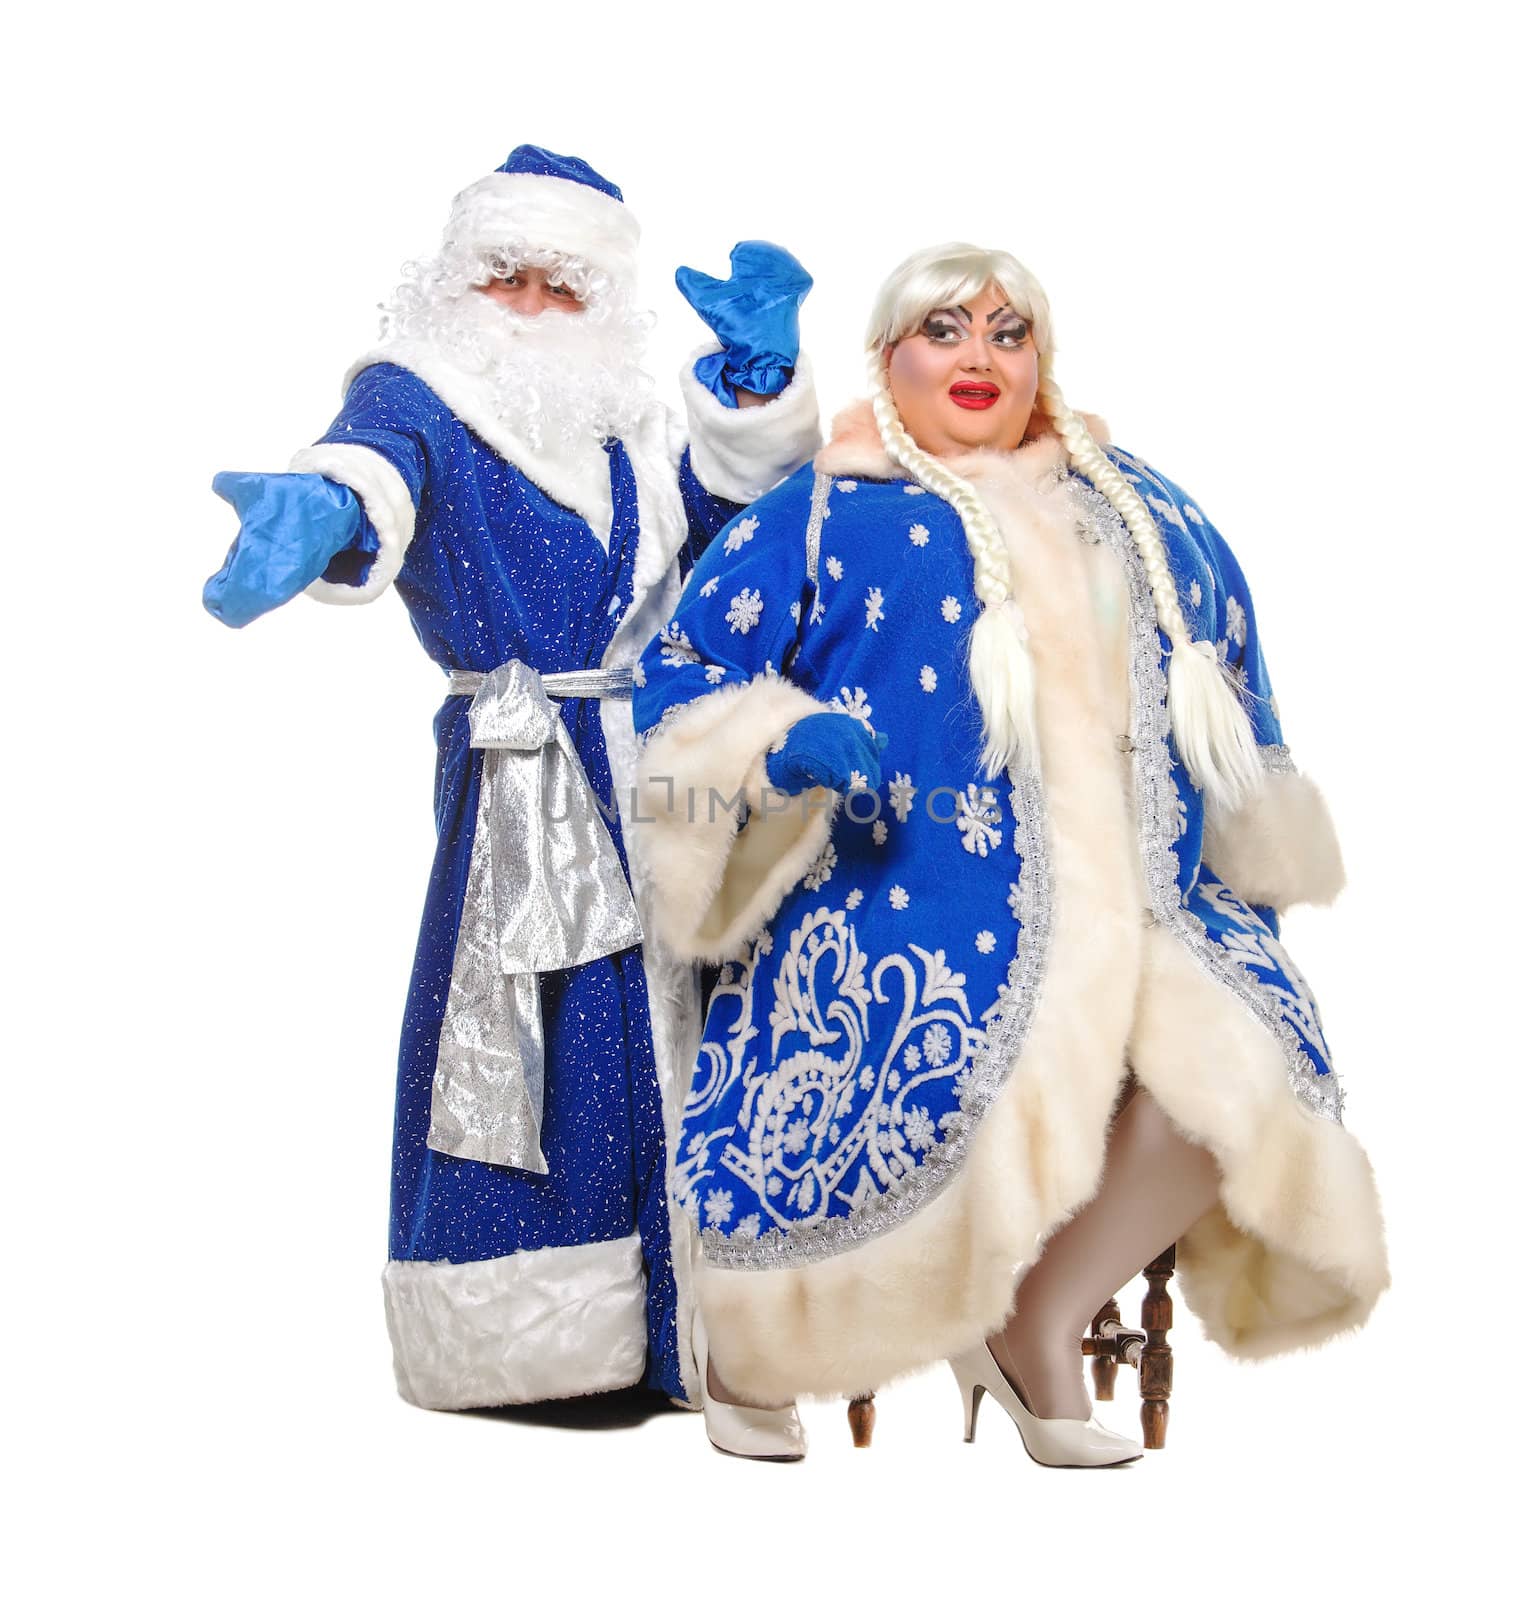 Travesty Actors Genre Depict Santa Claus and Snow Maiden by Discovod